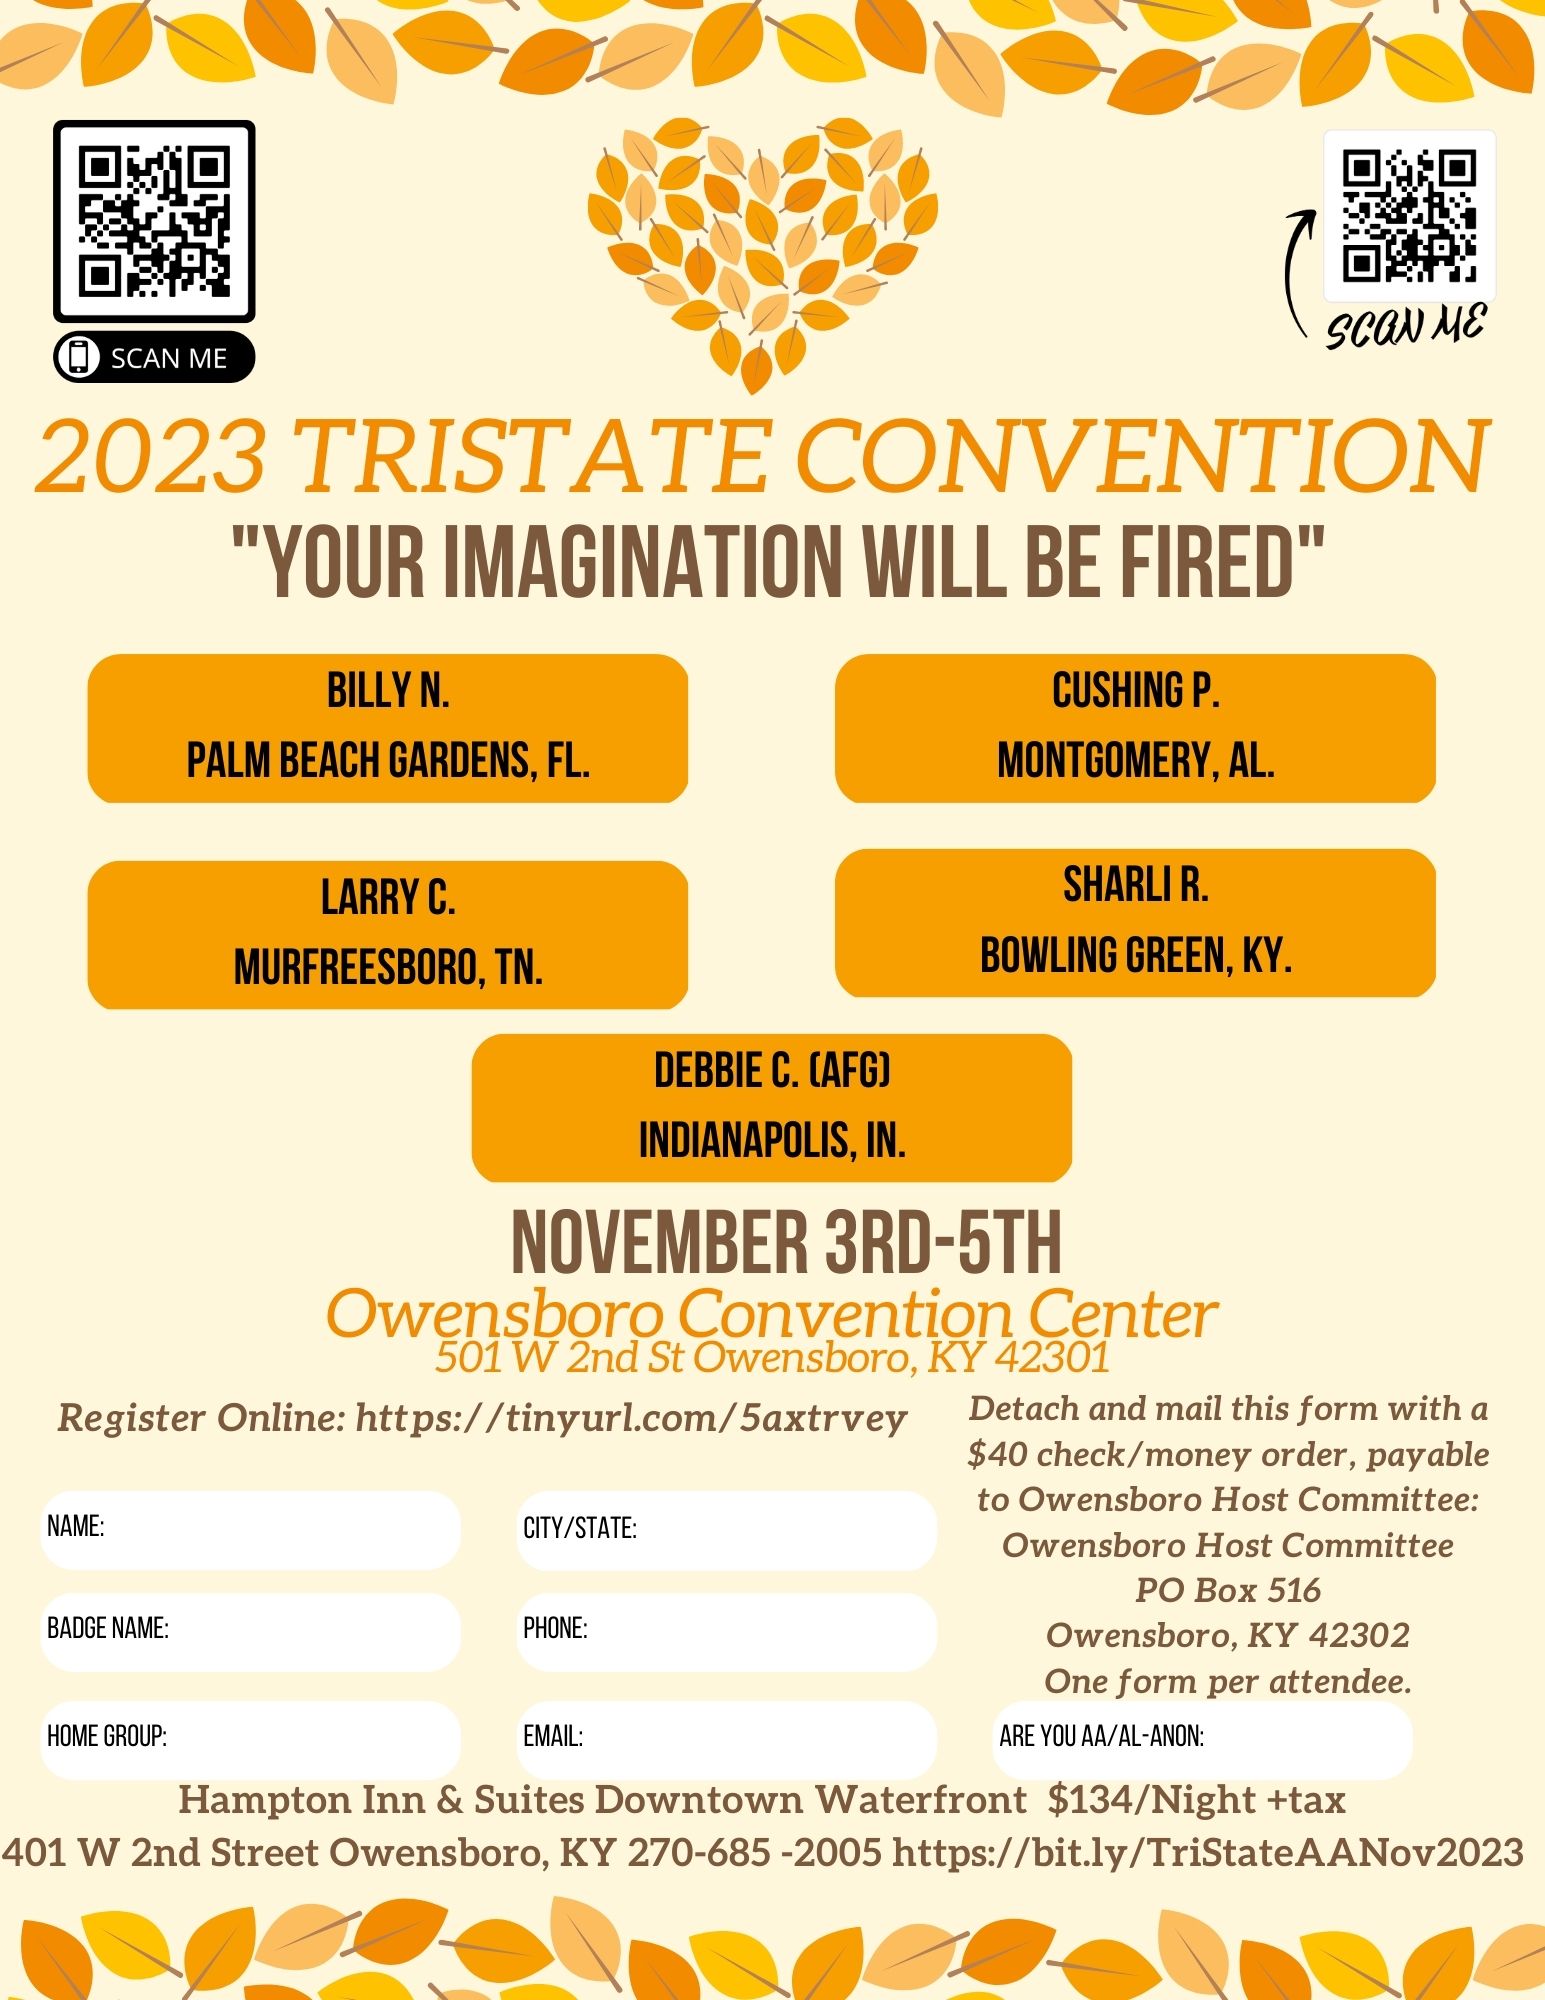 2023 Tristate AA Convention Flyer Alcoholics Anonymous Area 26 (Kentucky)